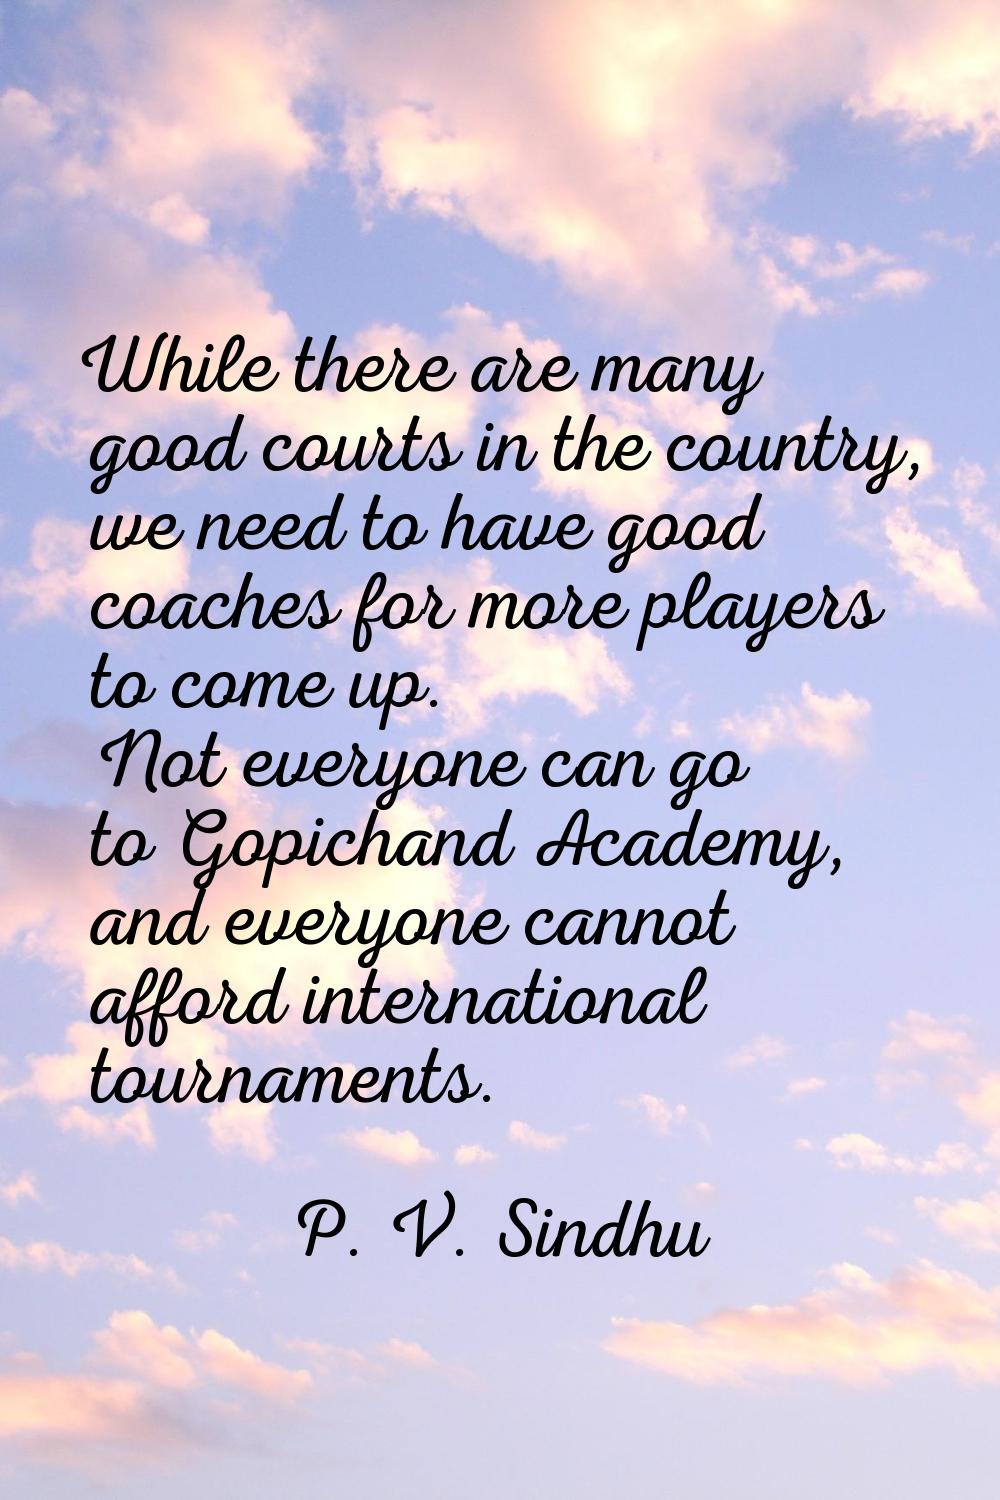 While there are many good courts in the country, we need to have good coaches for more players to c